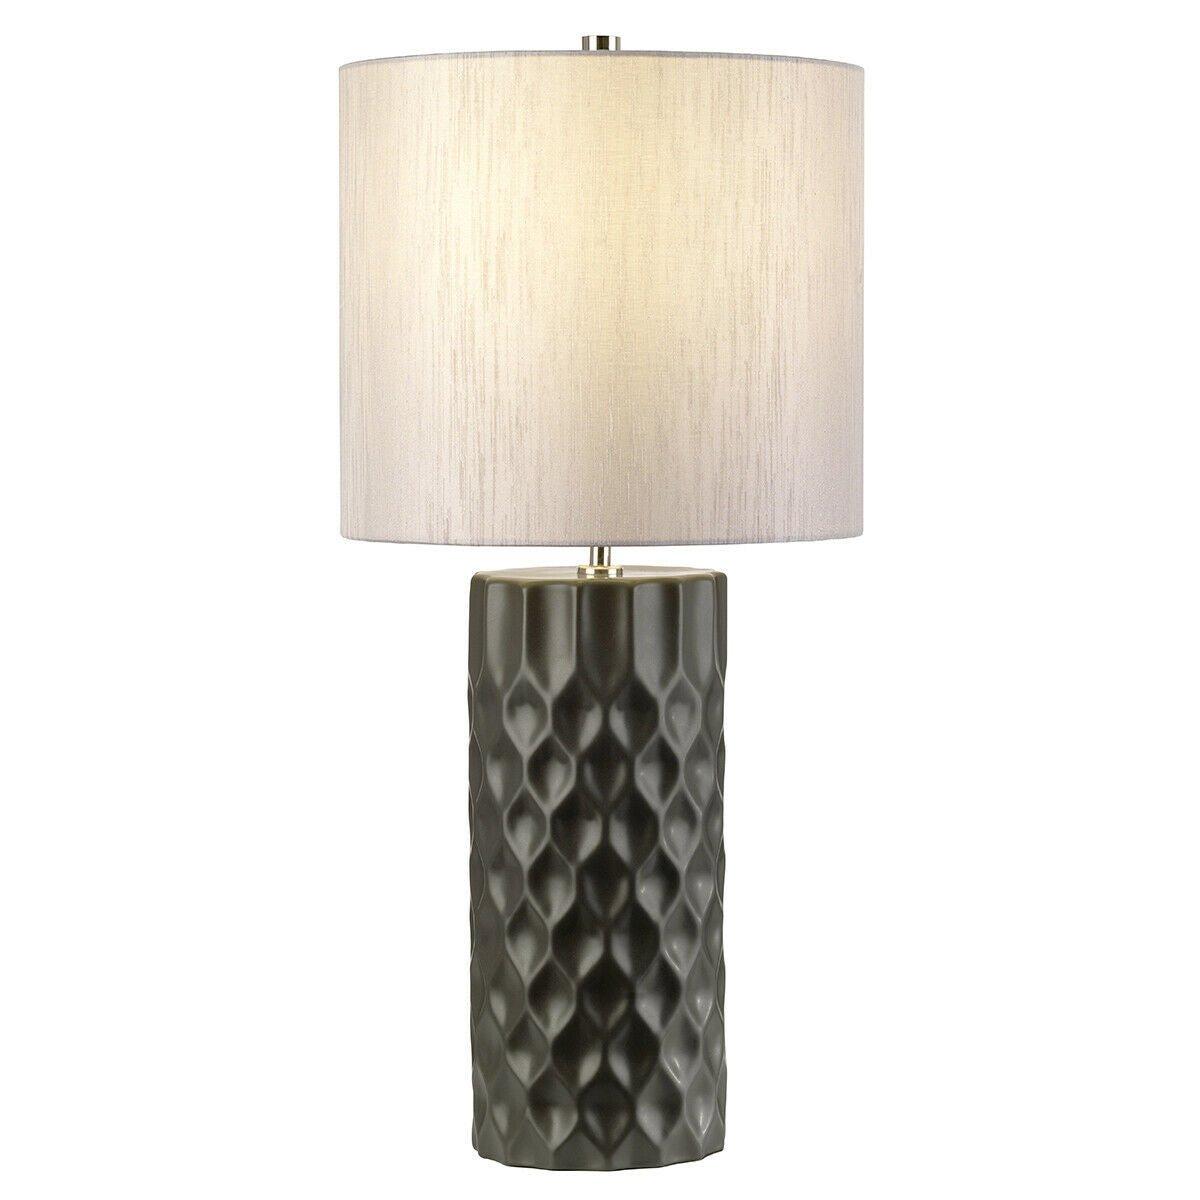 Table Lamp Steel Shade Polished Nickel Finial Graphite Finish LED E27 60W Bulb